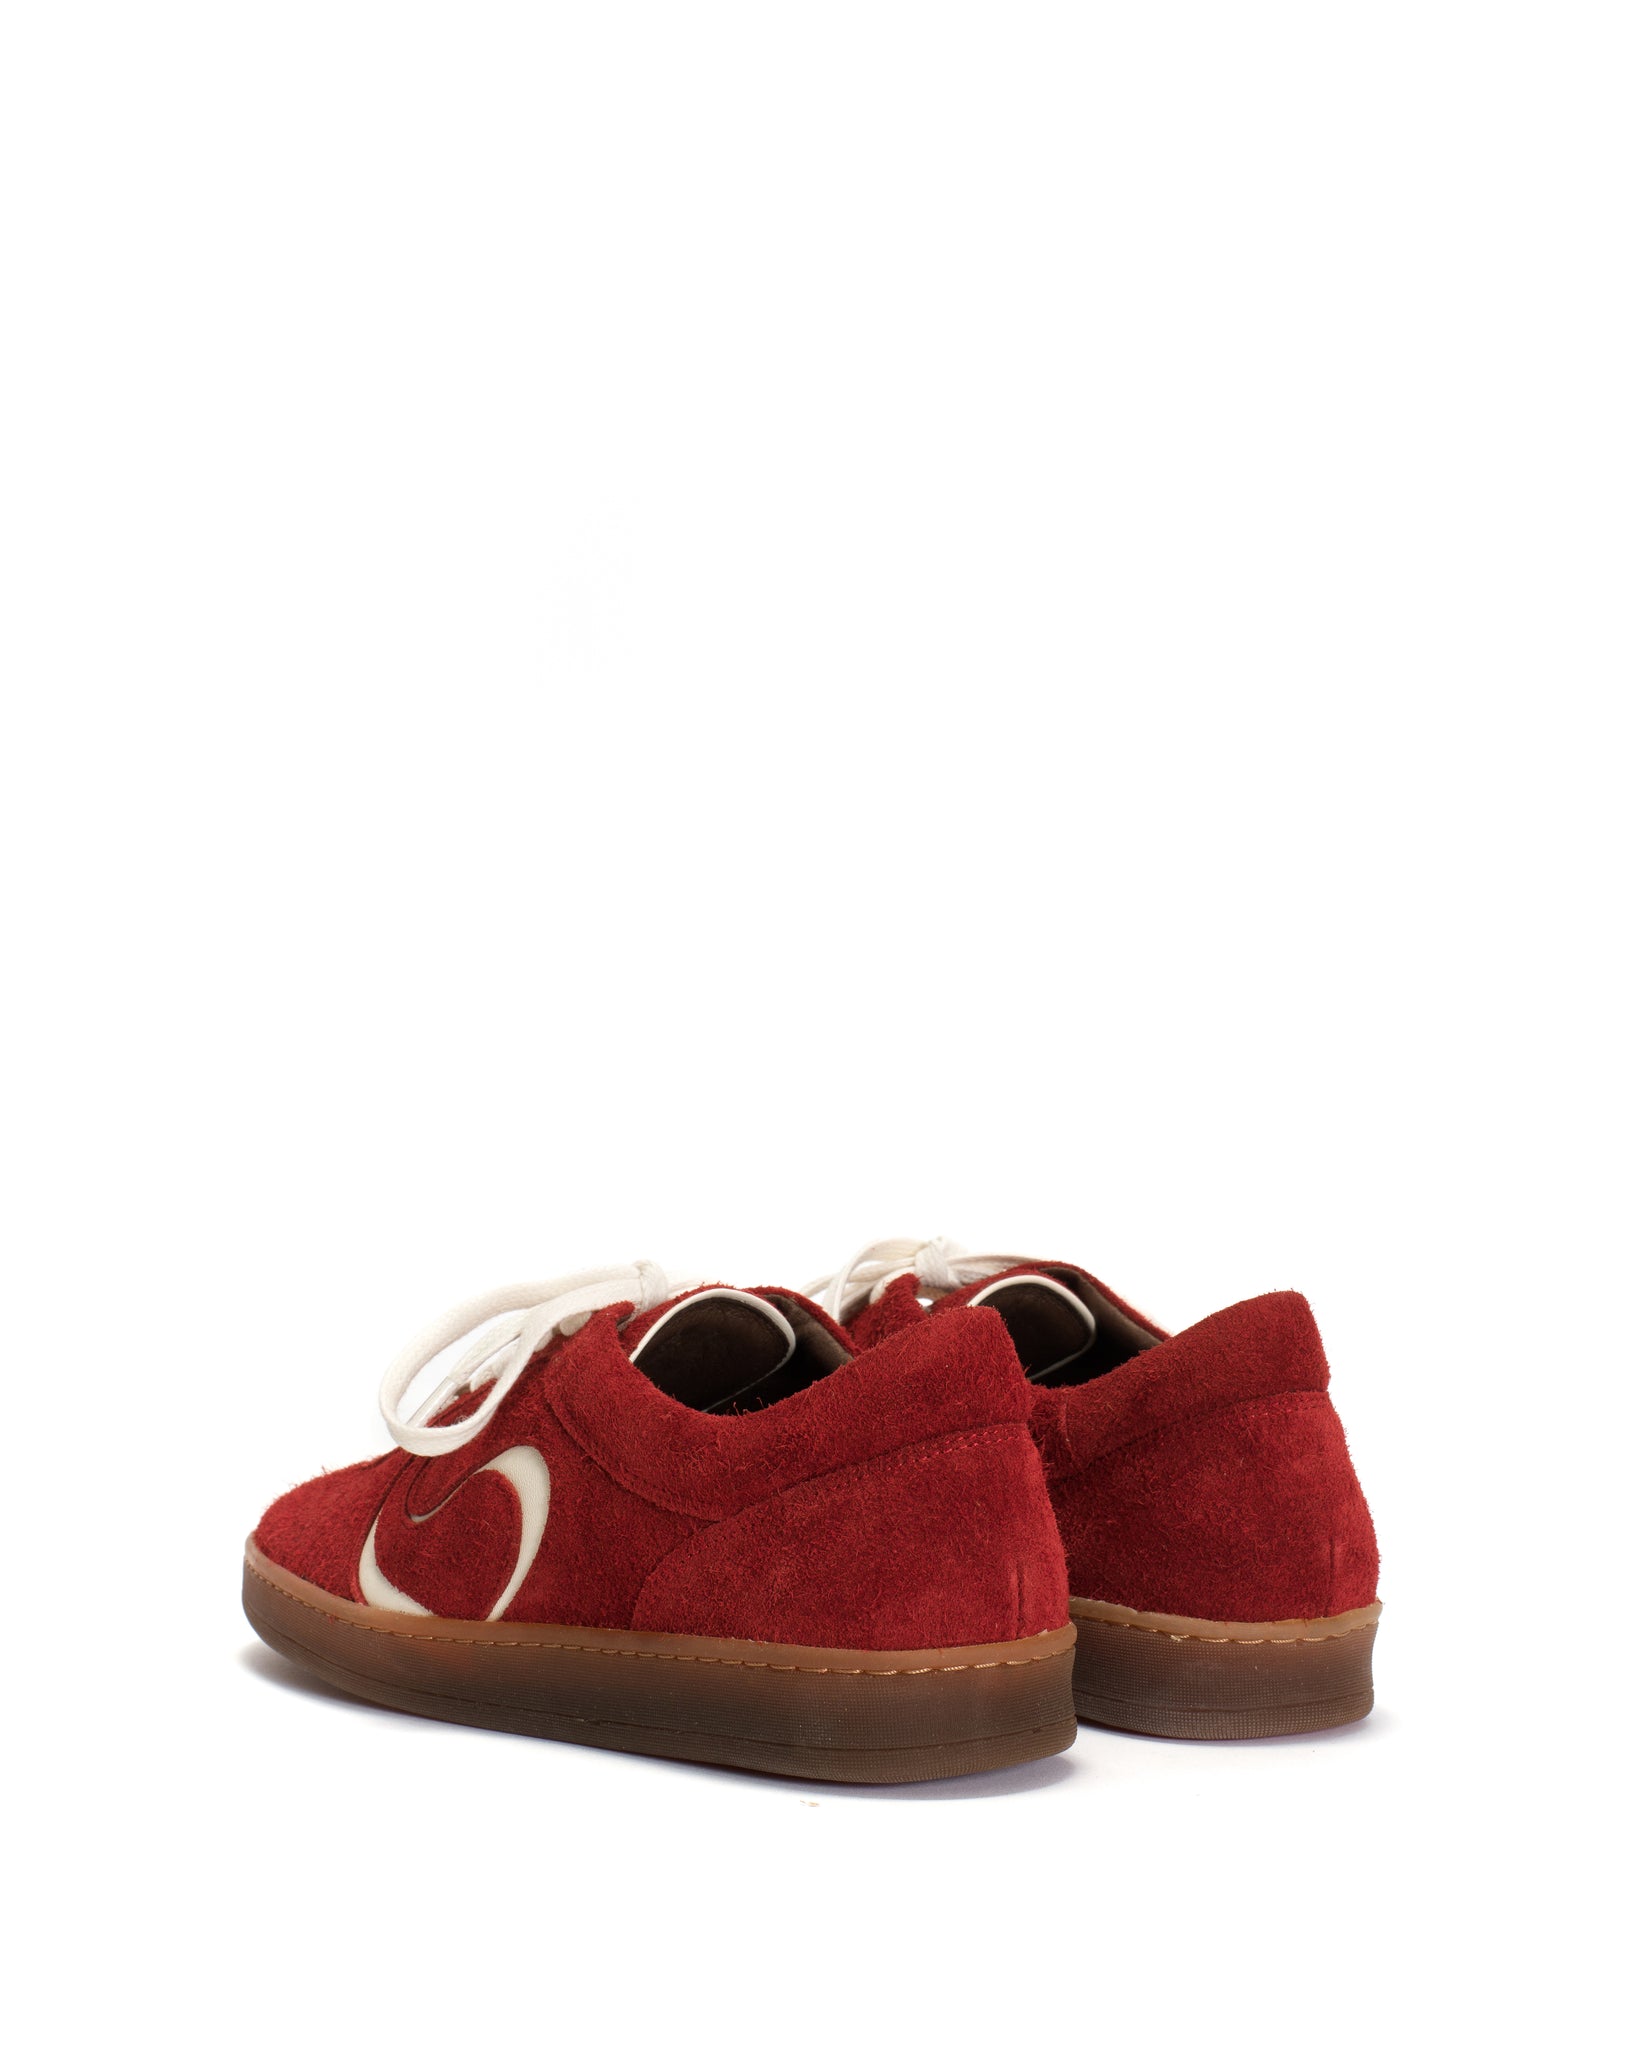 Blaire Plushed calf suede Ruby red